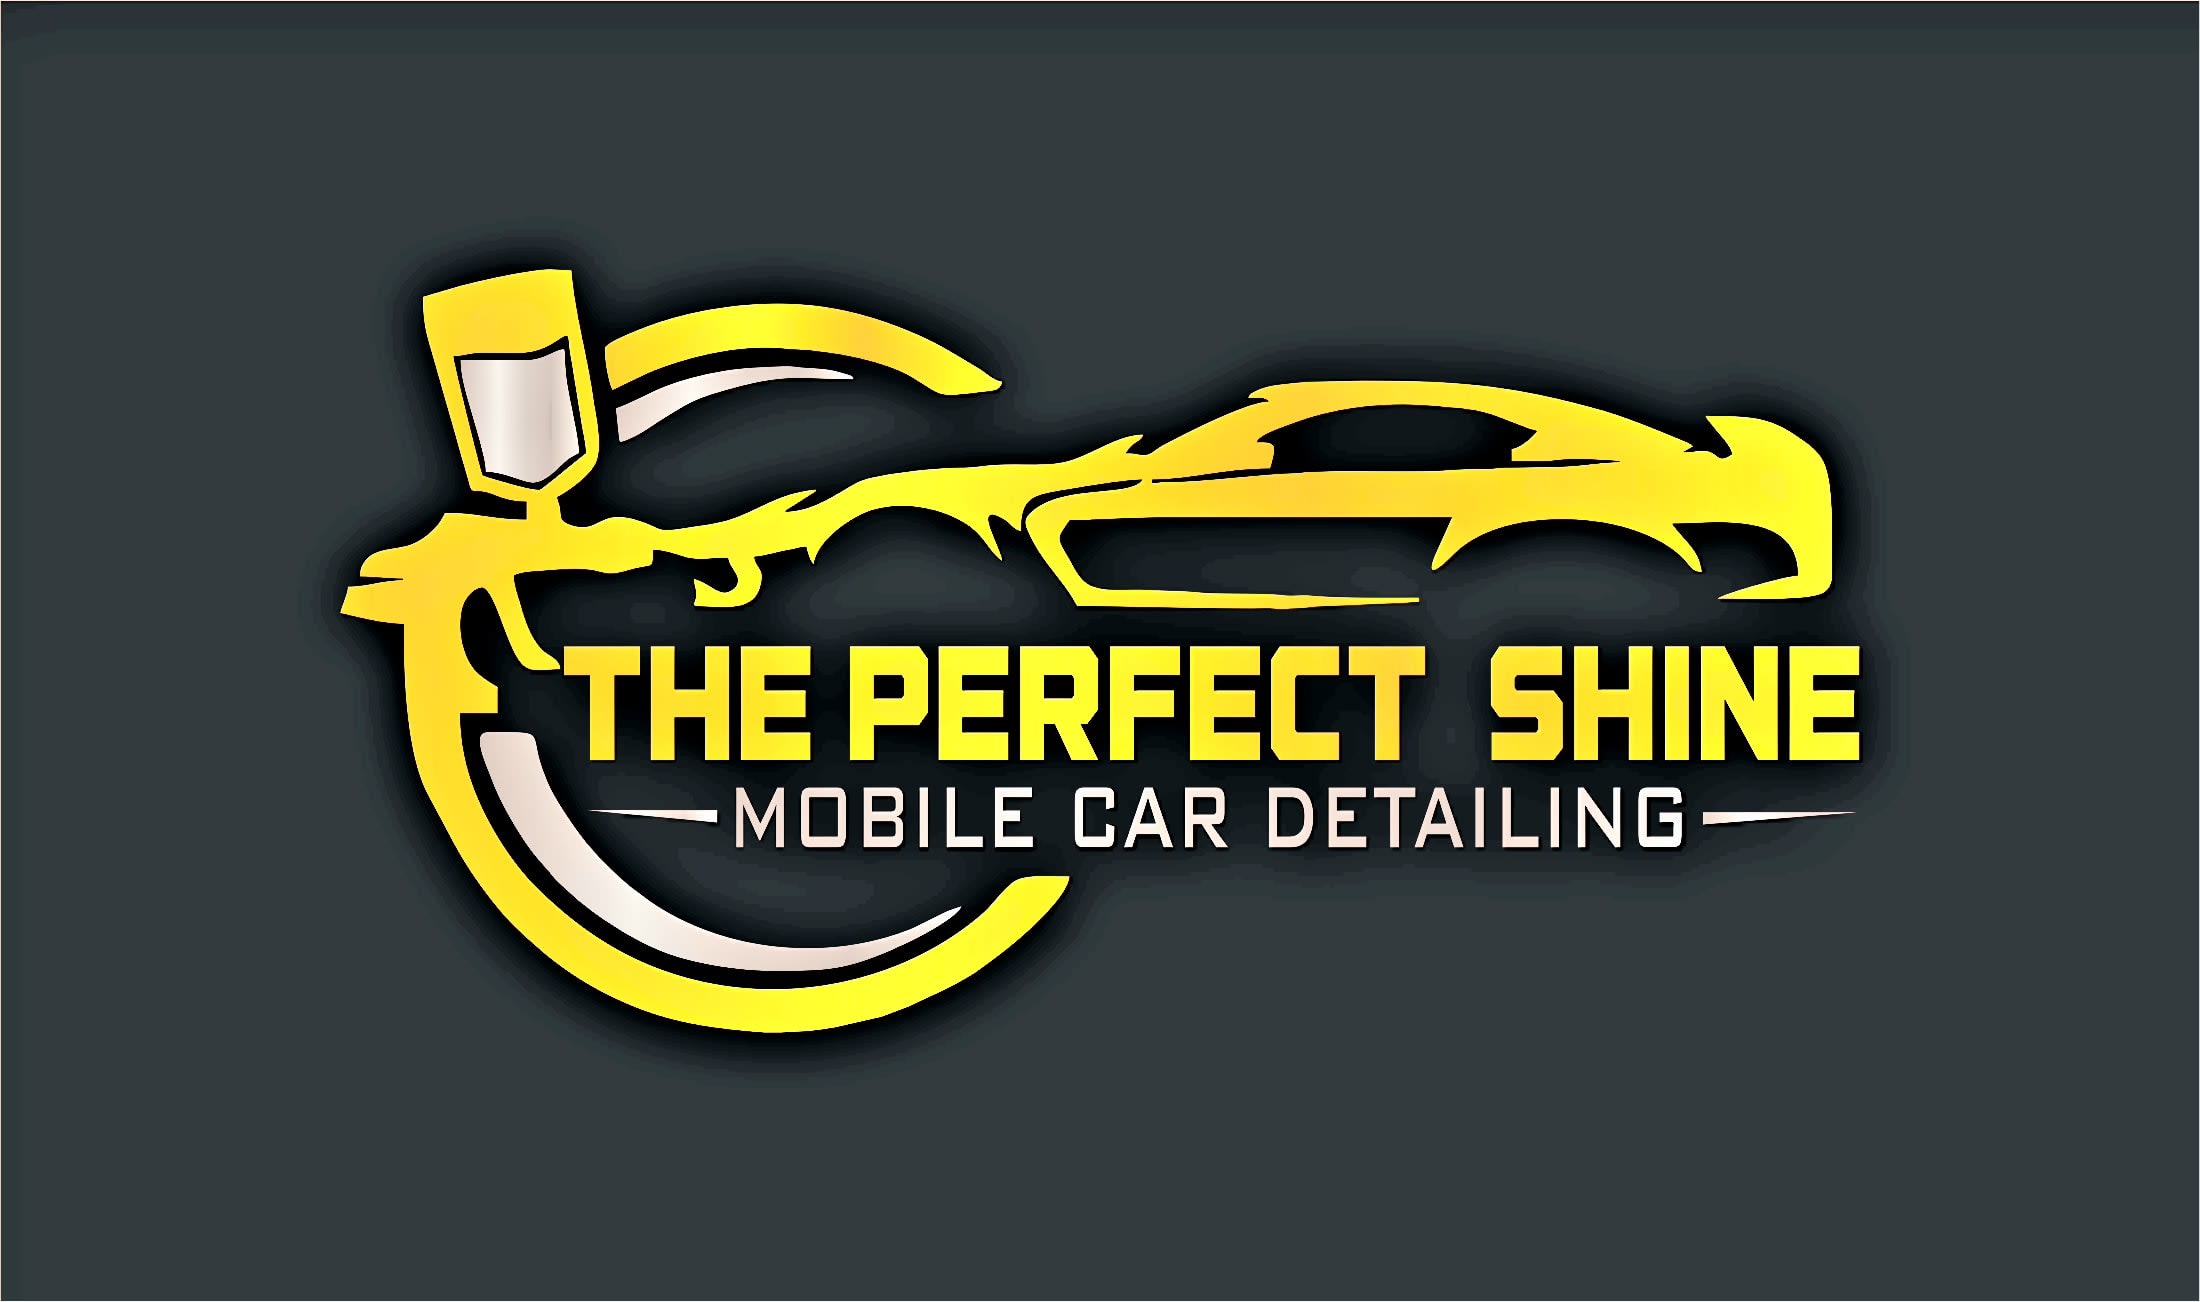 The Perfect Shine Mobile Car Detailing